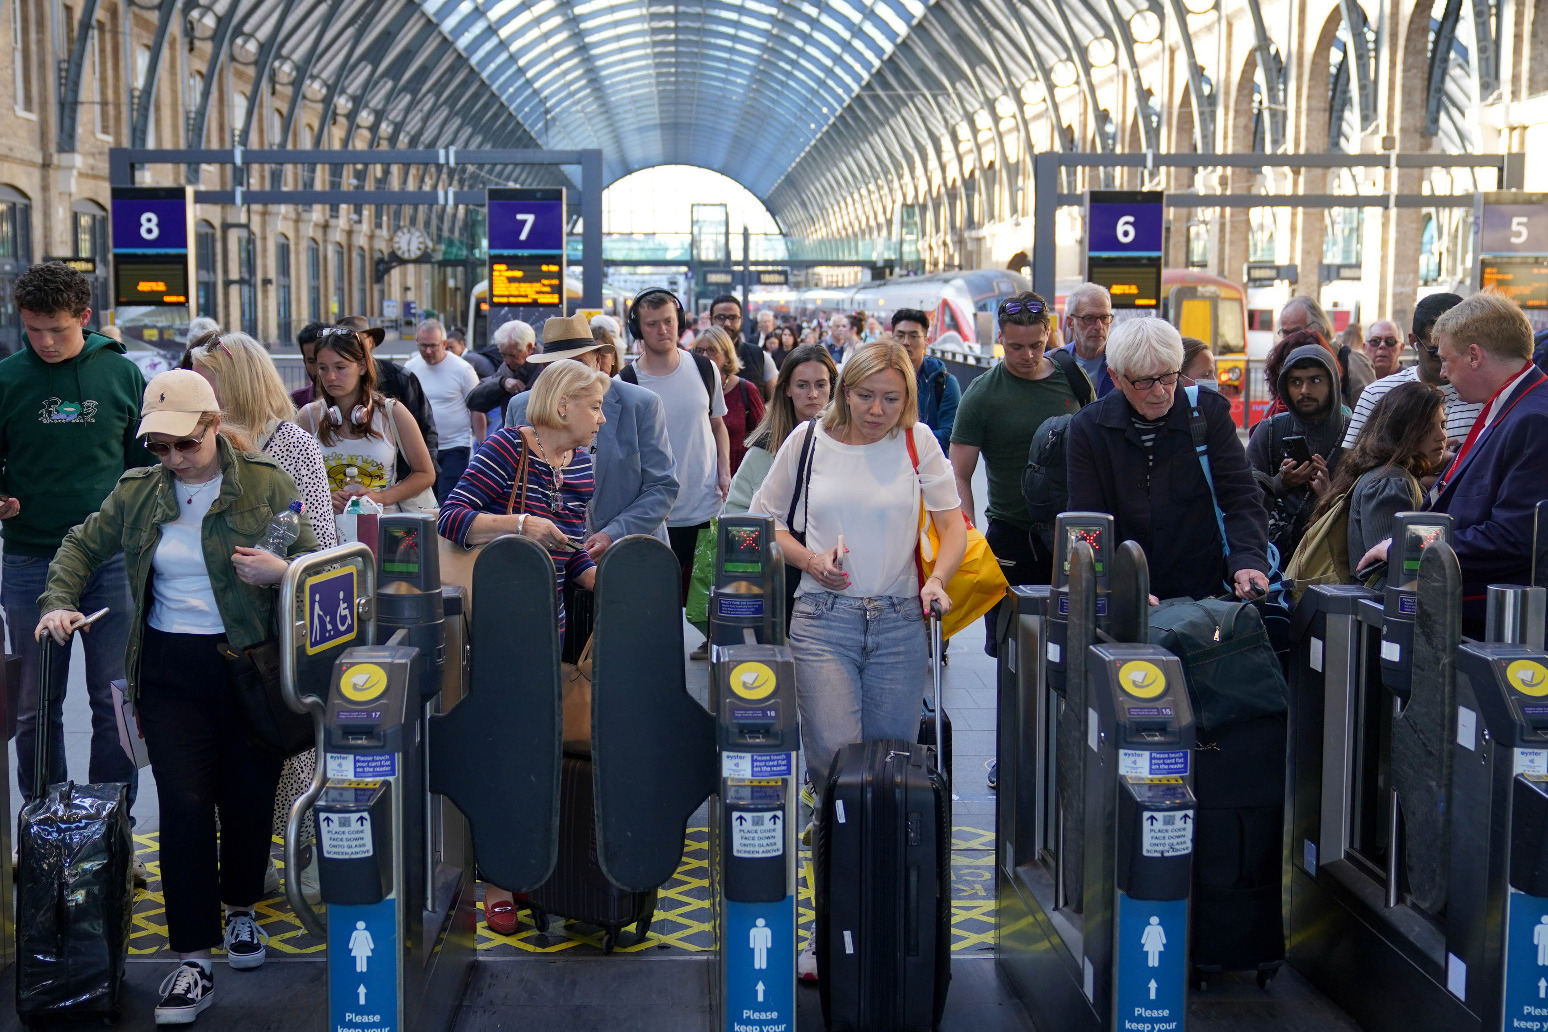 PM to call for ‘sensible compromise’ to shield passengers from rail chaos 